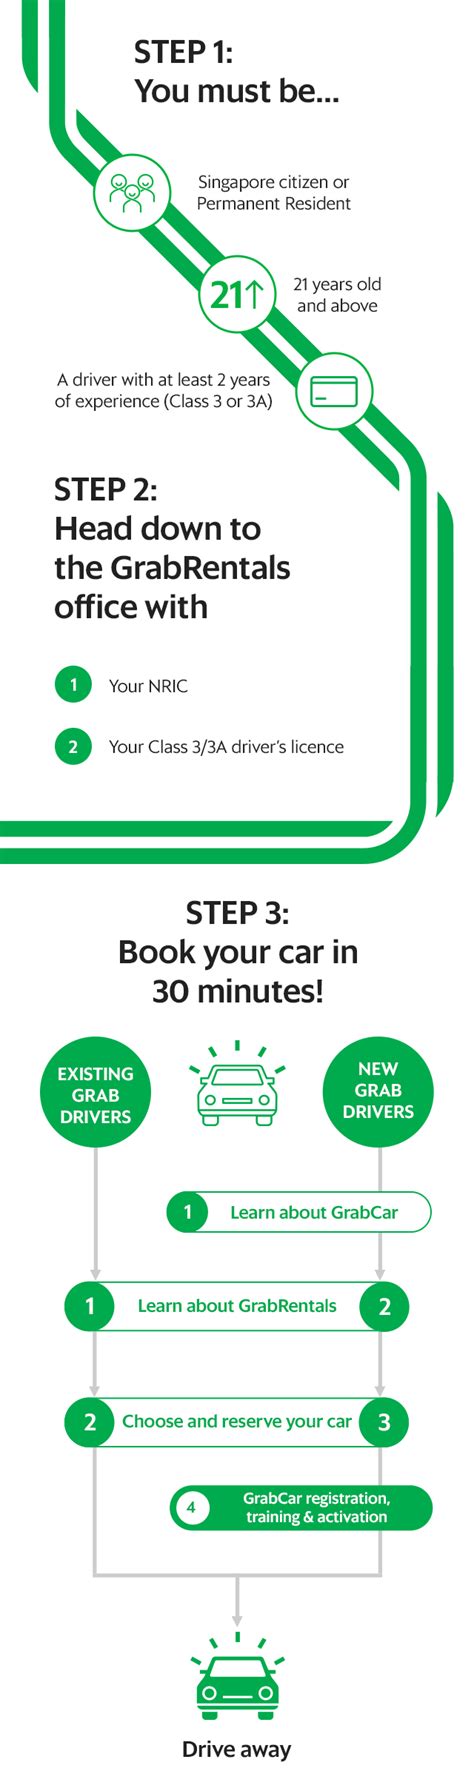 What made the grabcar rental service different from the standard grabcar offering is that customers are paying for the service by hour basis. GrabRentals - Car Rental Singapore | Grab SG